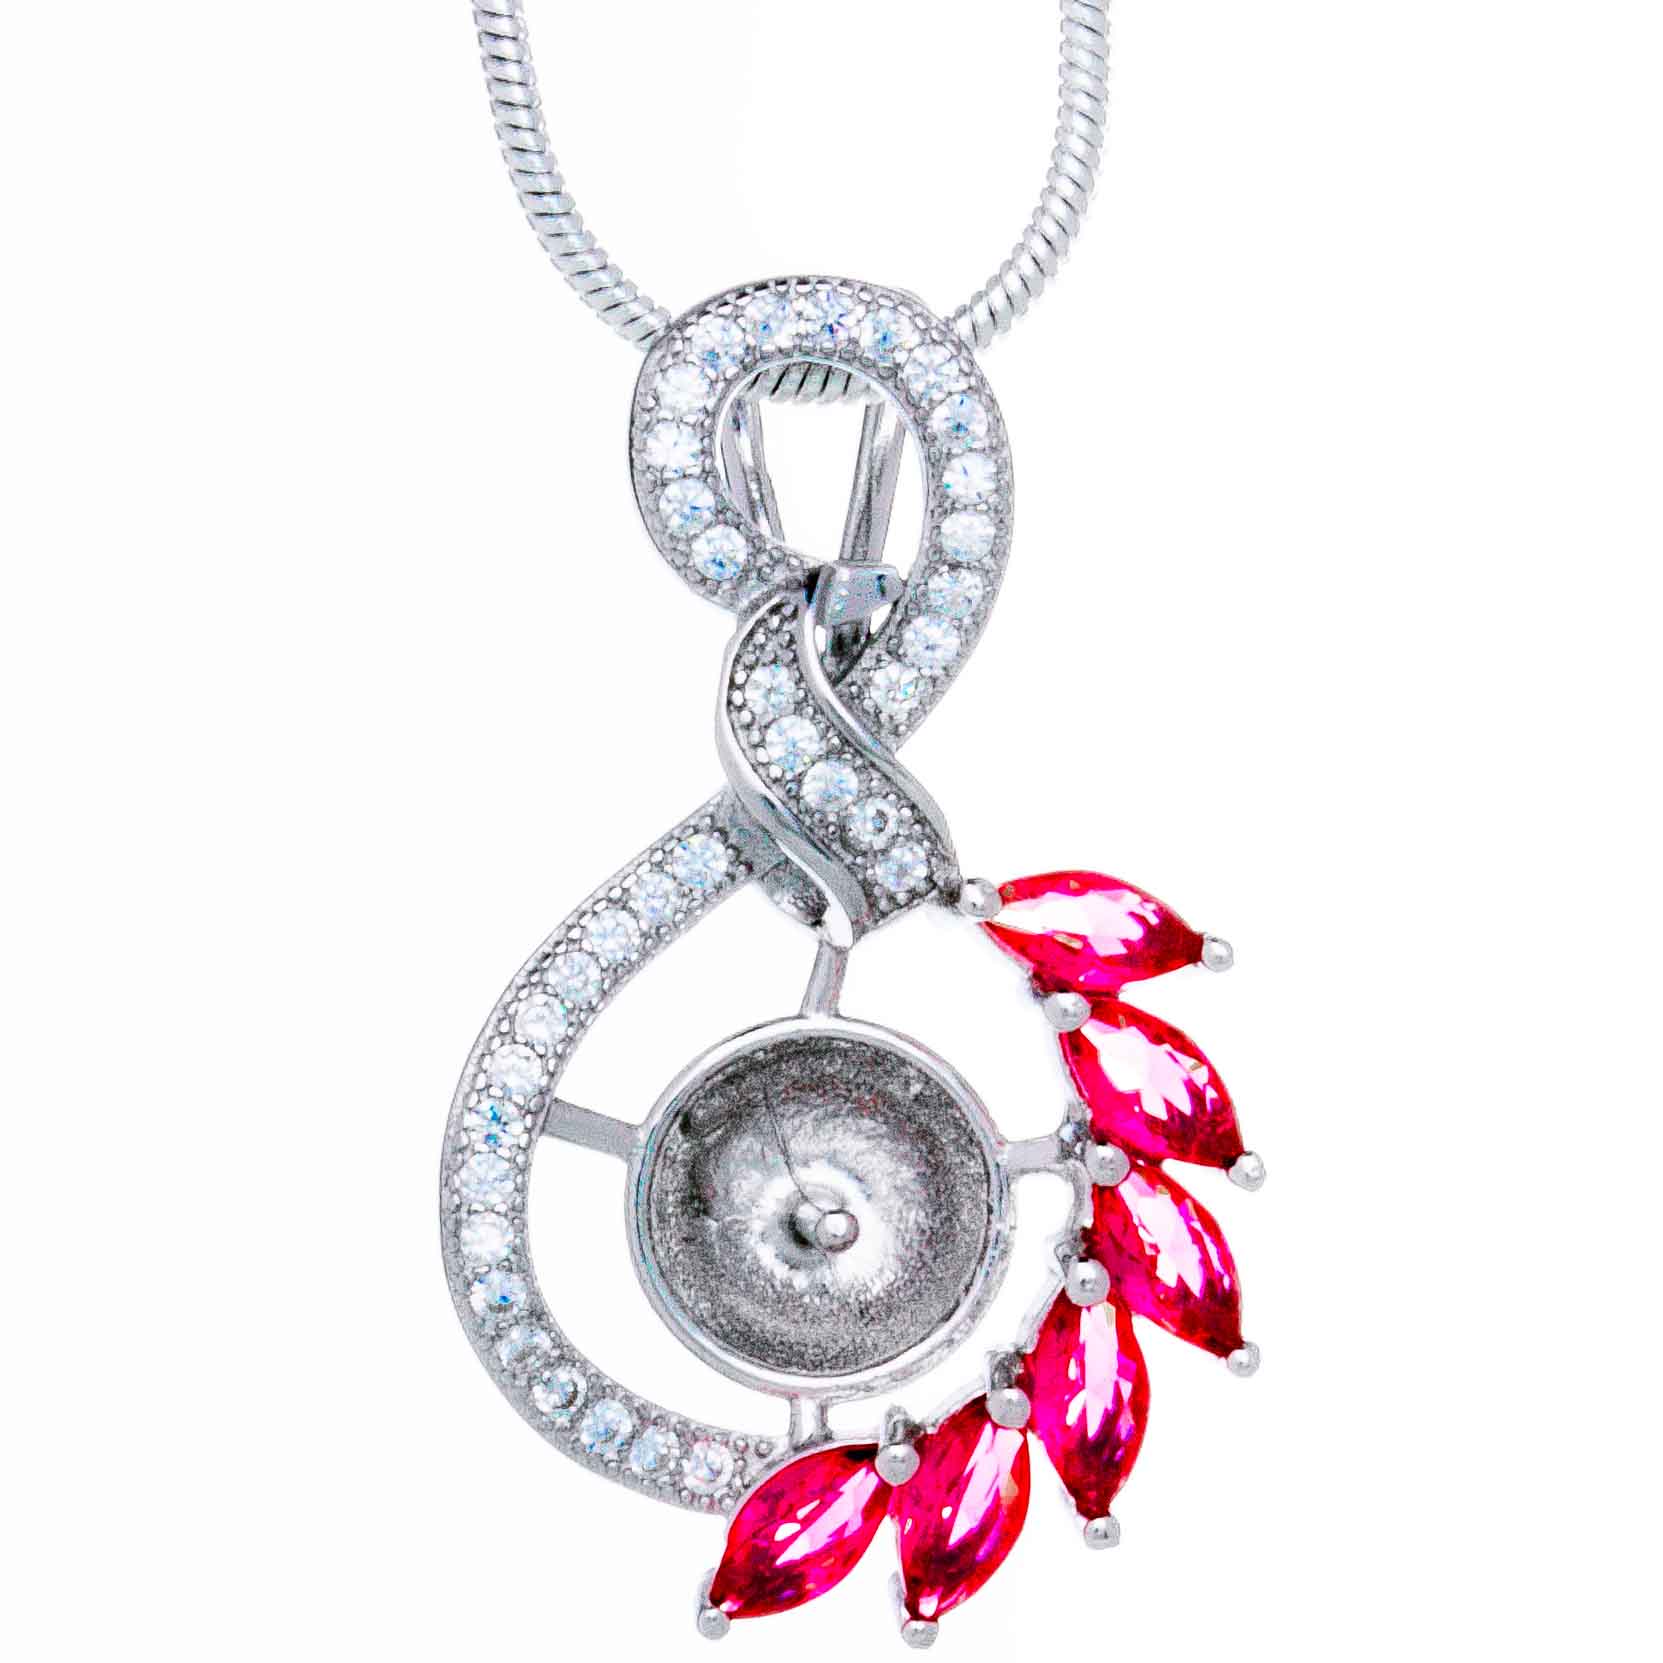 DIY Mount Pendant - 925 Sterling Silver Twisted Red Zircon Crystals